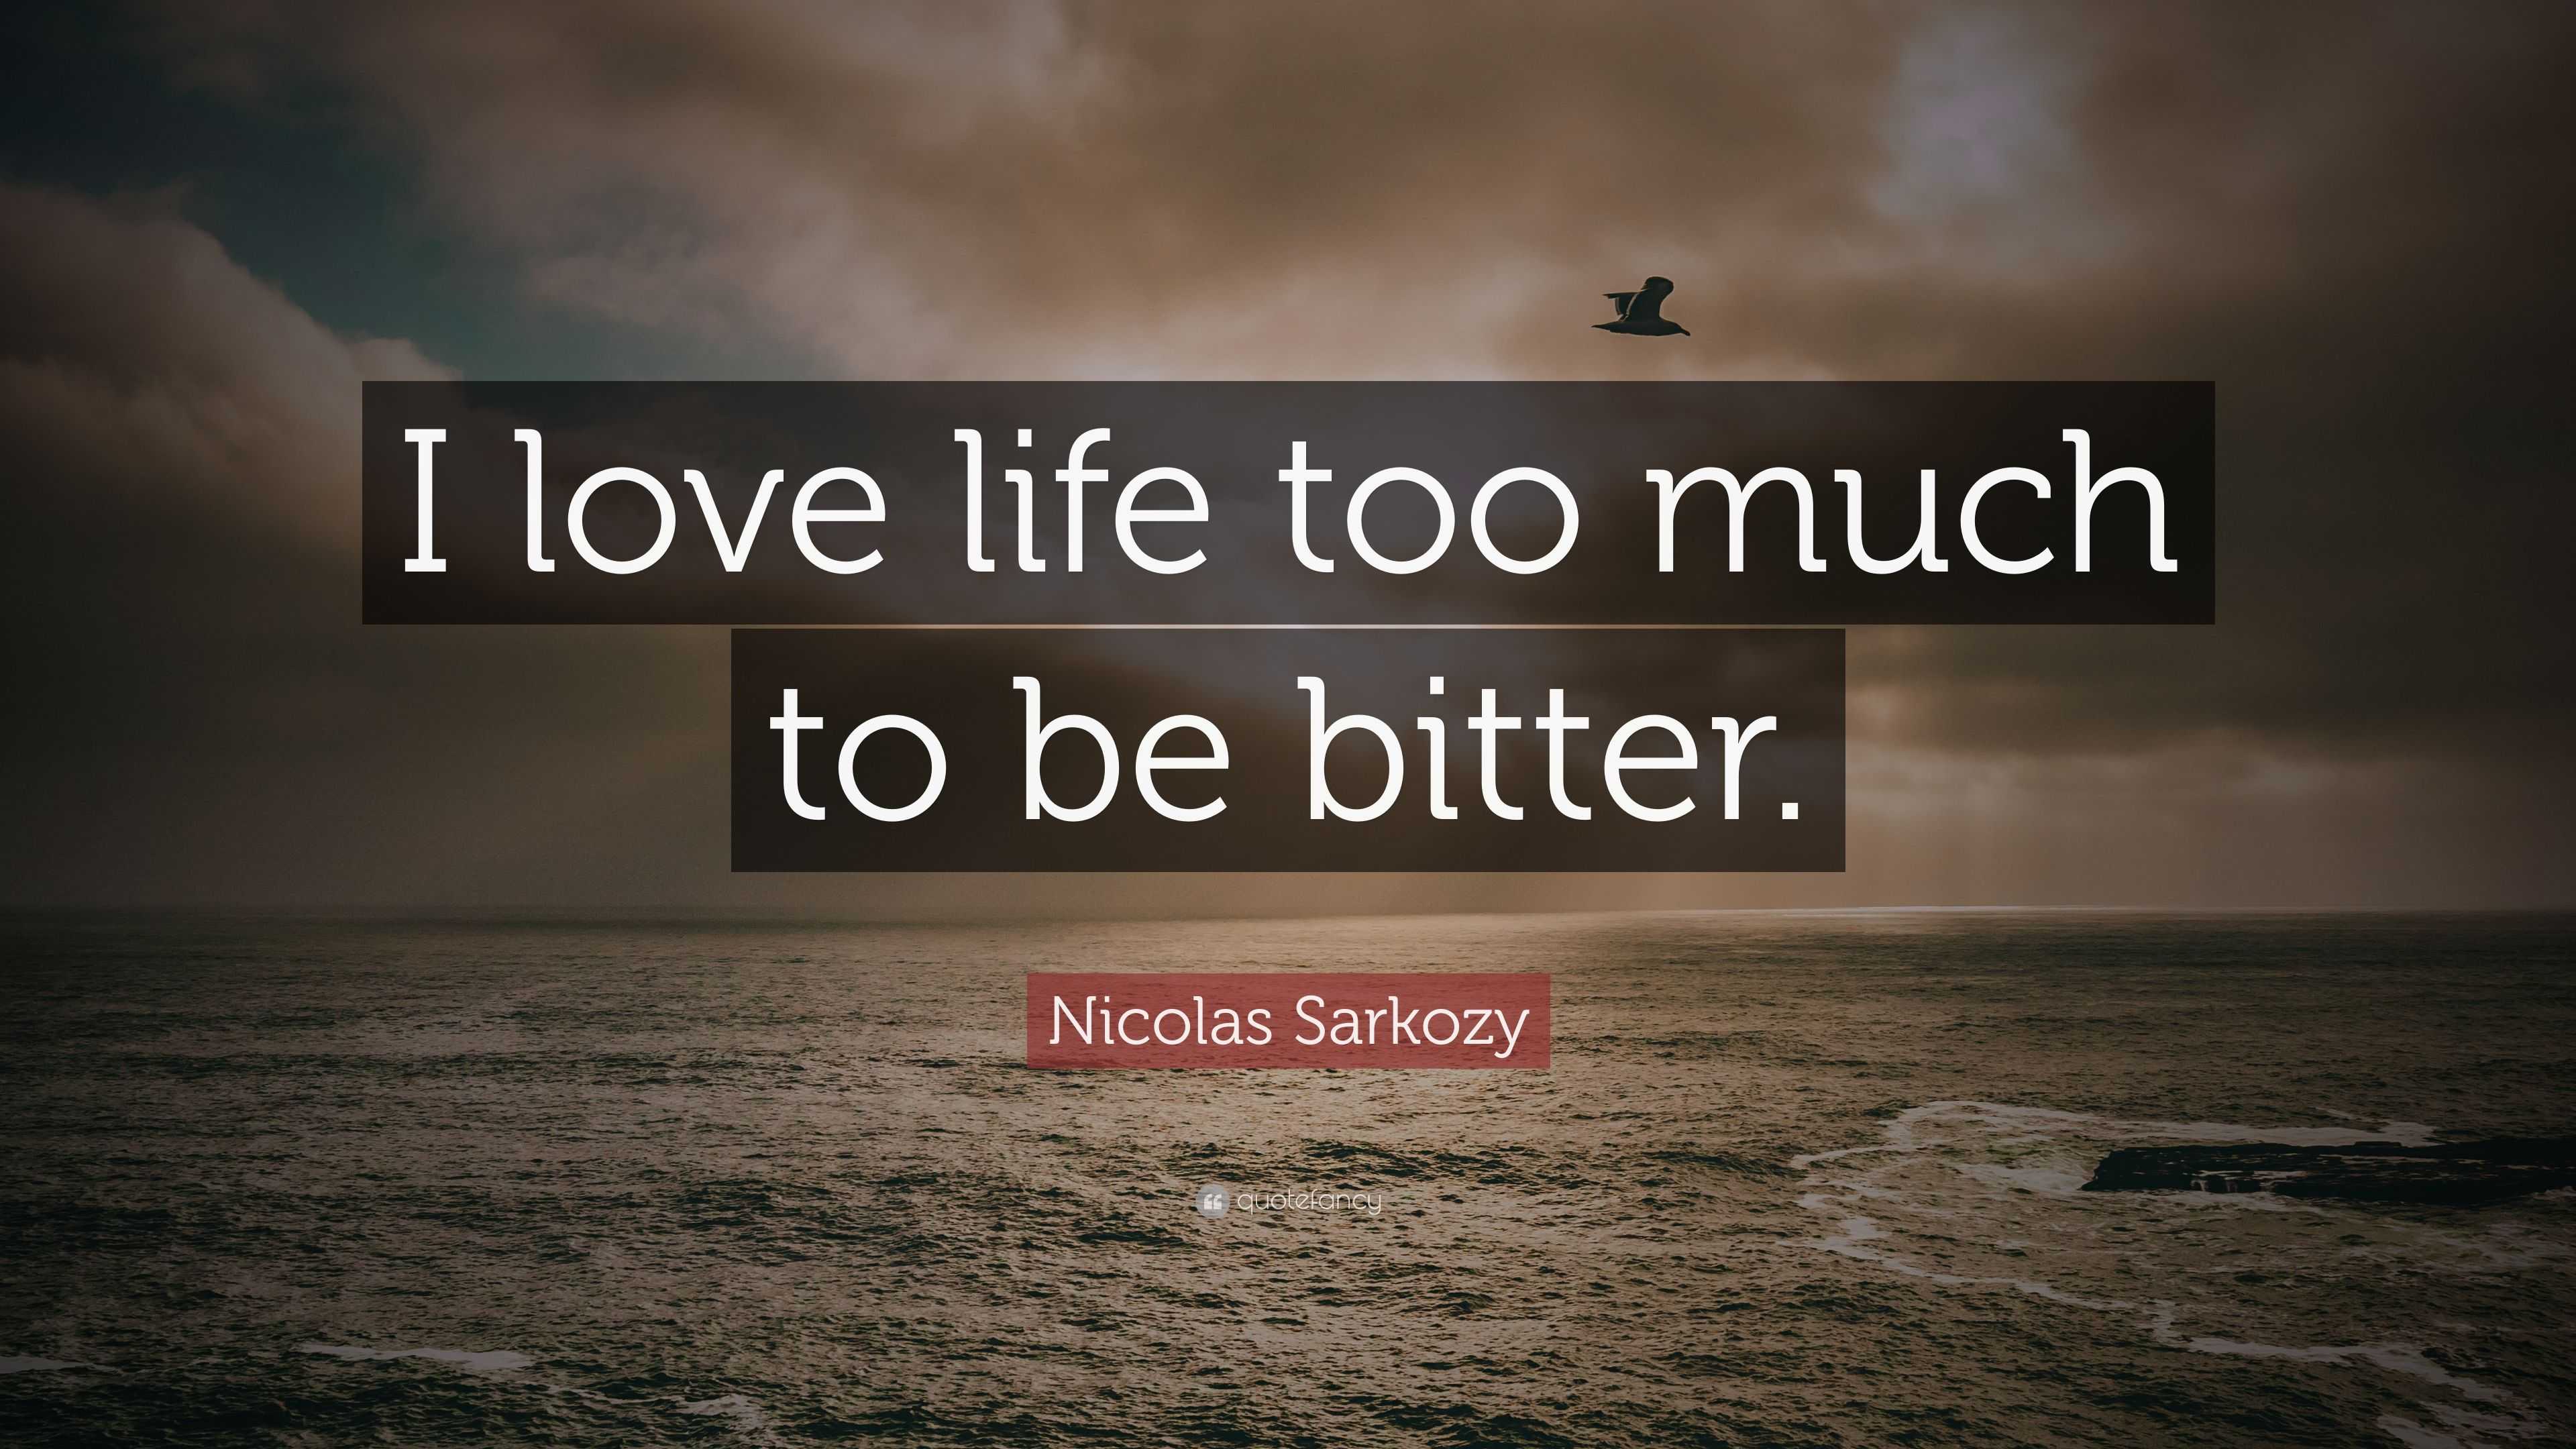 Nicolas Sarkozy Quote “I love life too much to be bitter ”